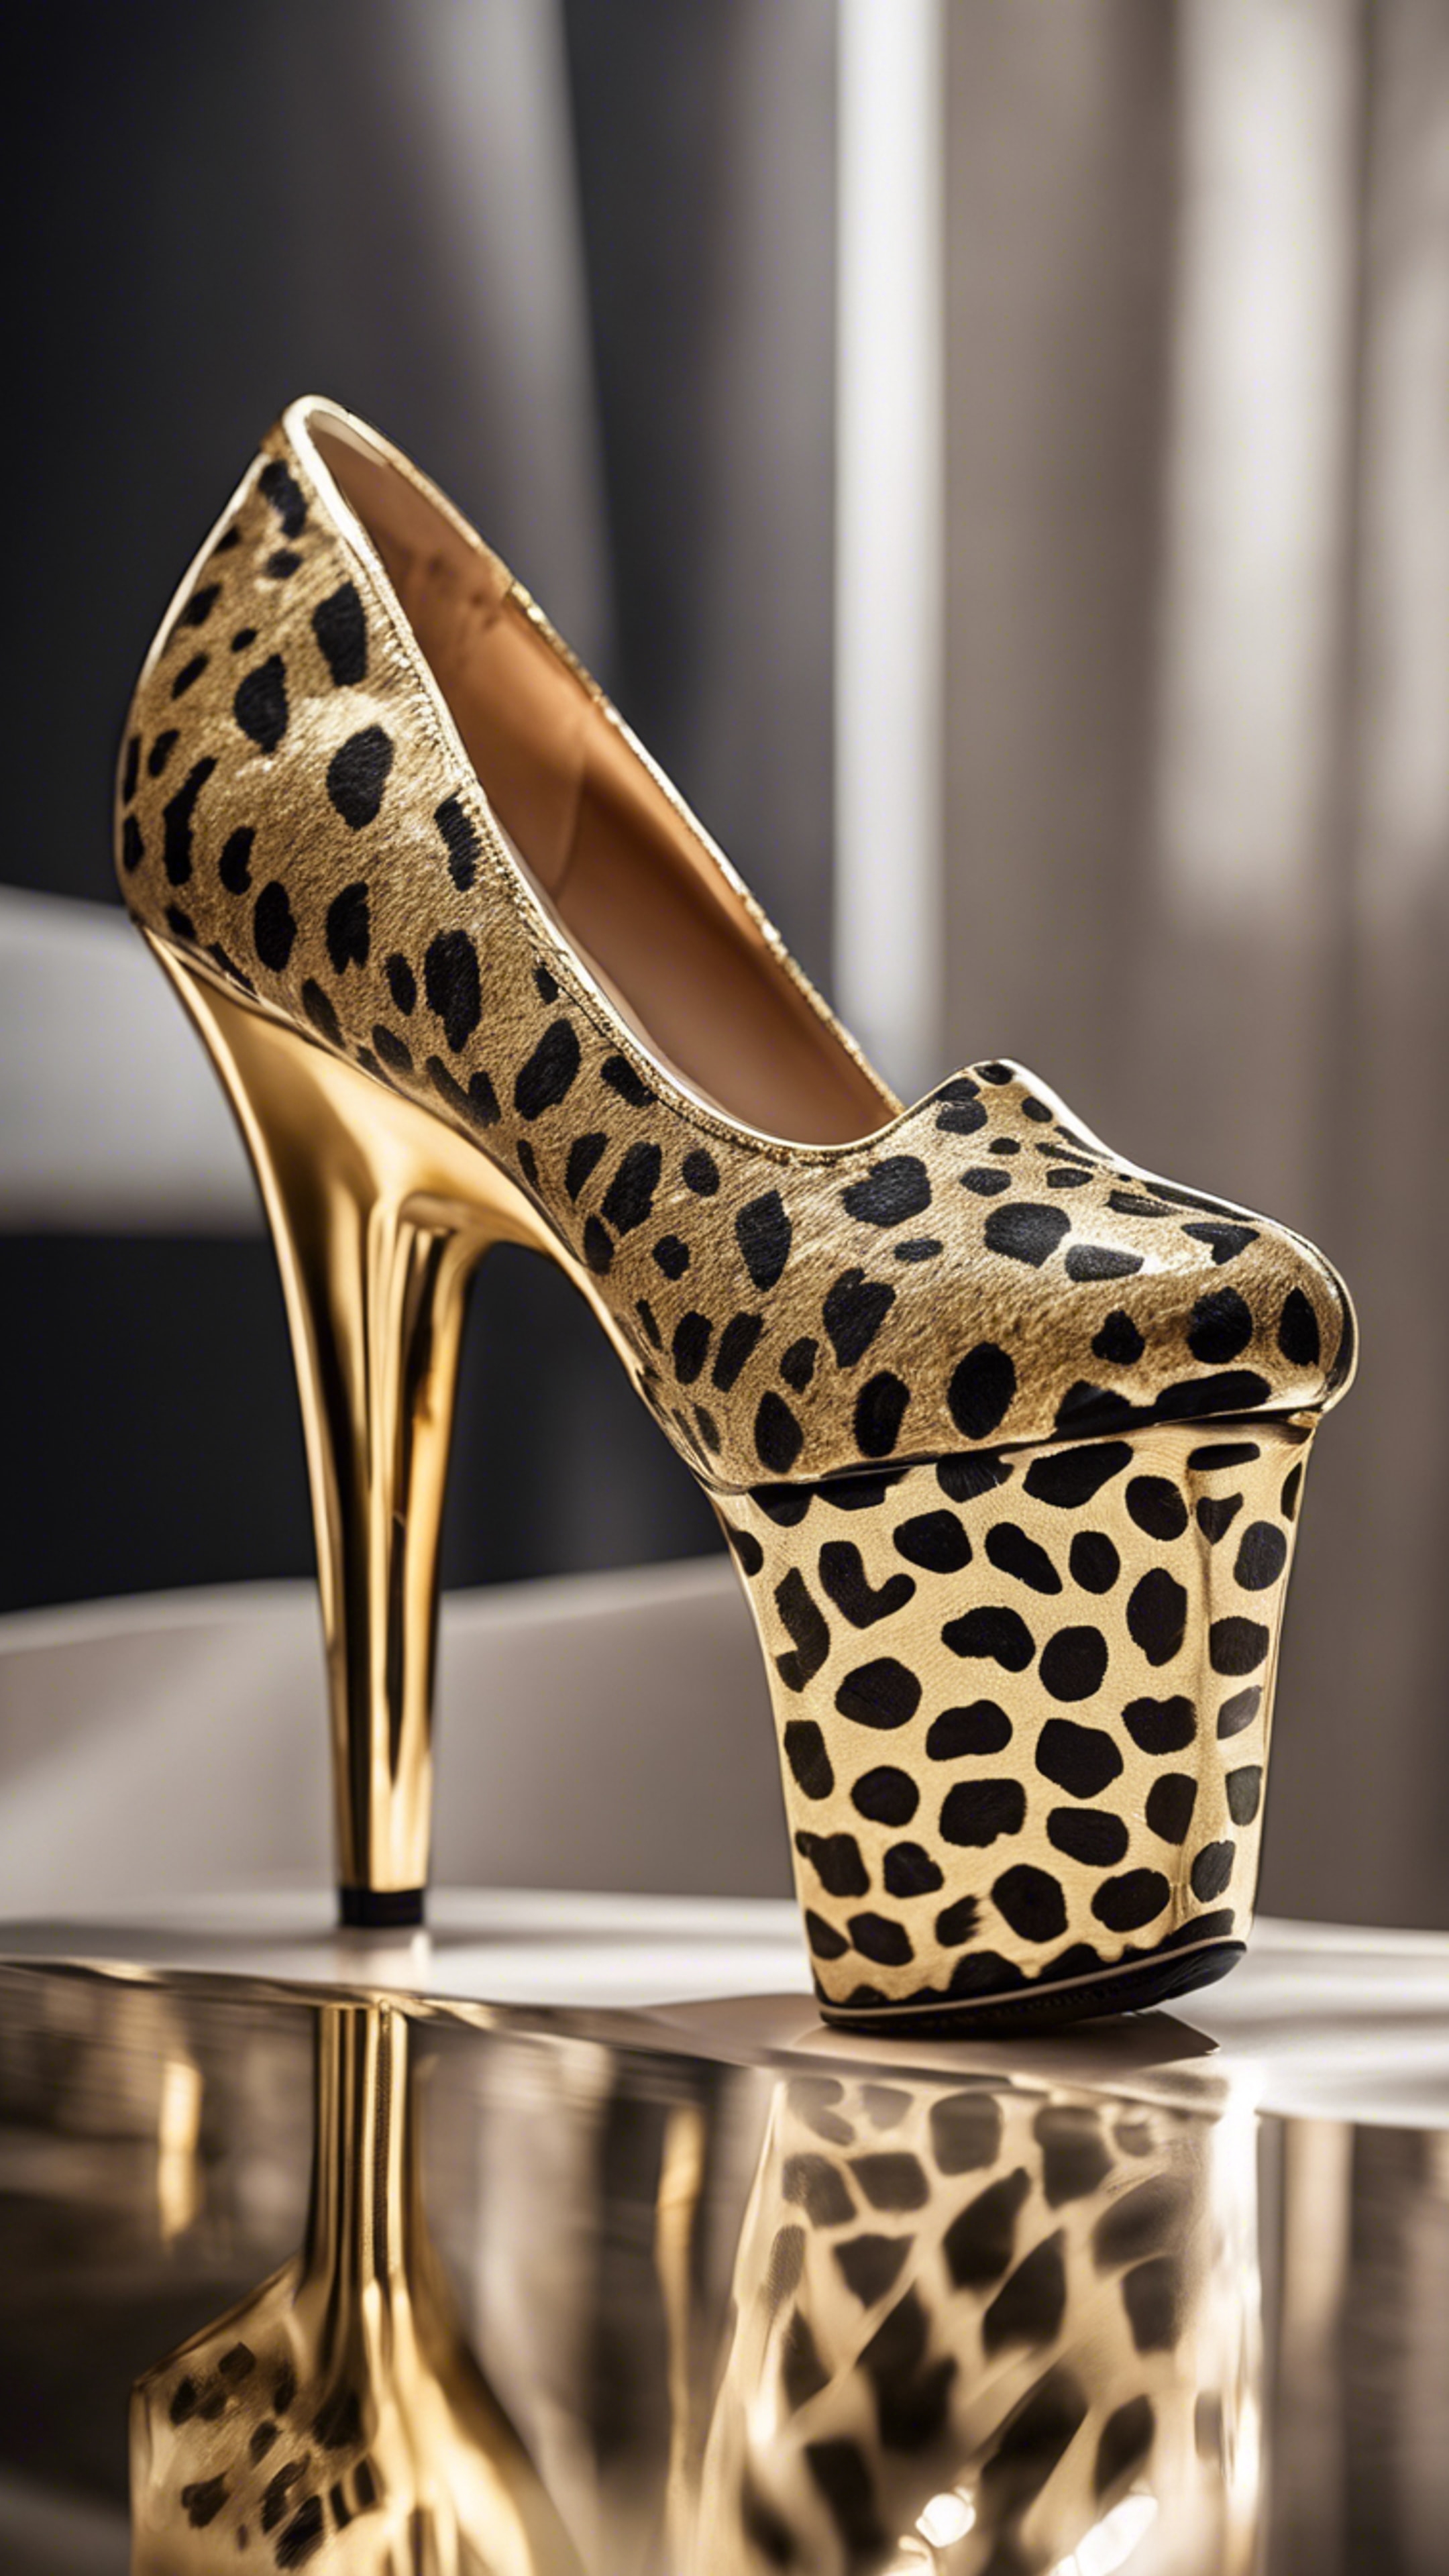 A high heeled shoe with a shiny cheetah print design in gold and black. Wallpaper[d8df044a656243b3bb4c]